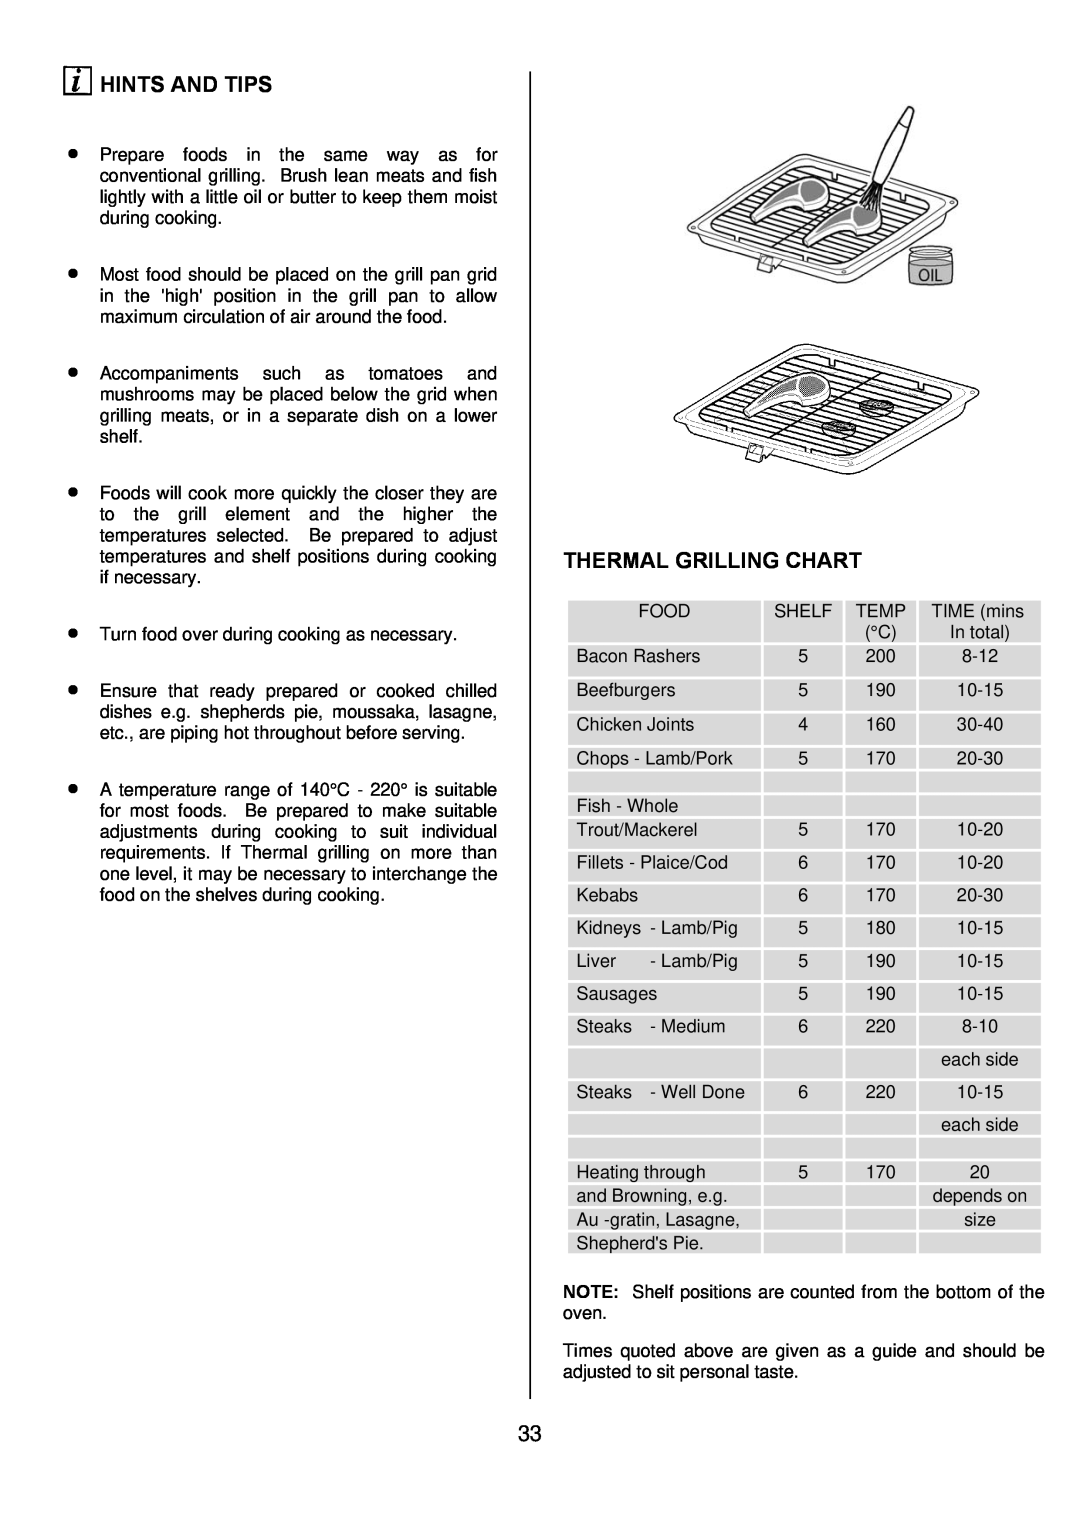 Zanussi ZUQ 875 manual Hints And Tips, Thermal Grilling Chart 